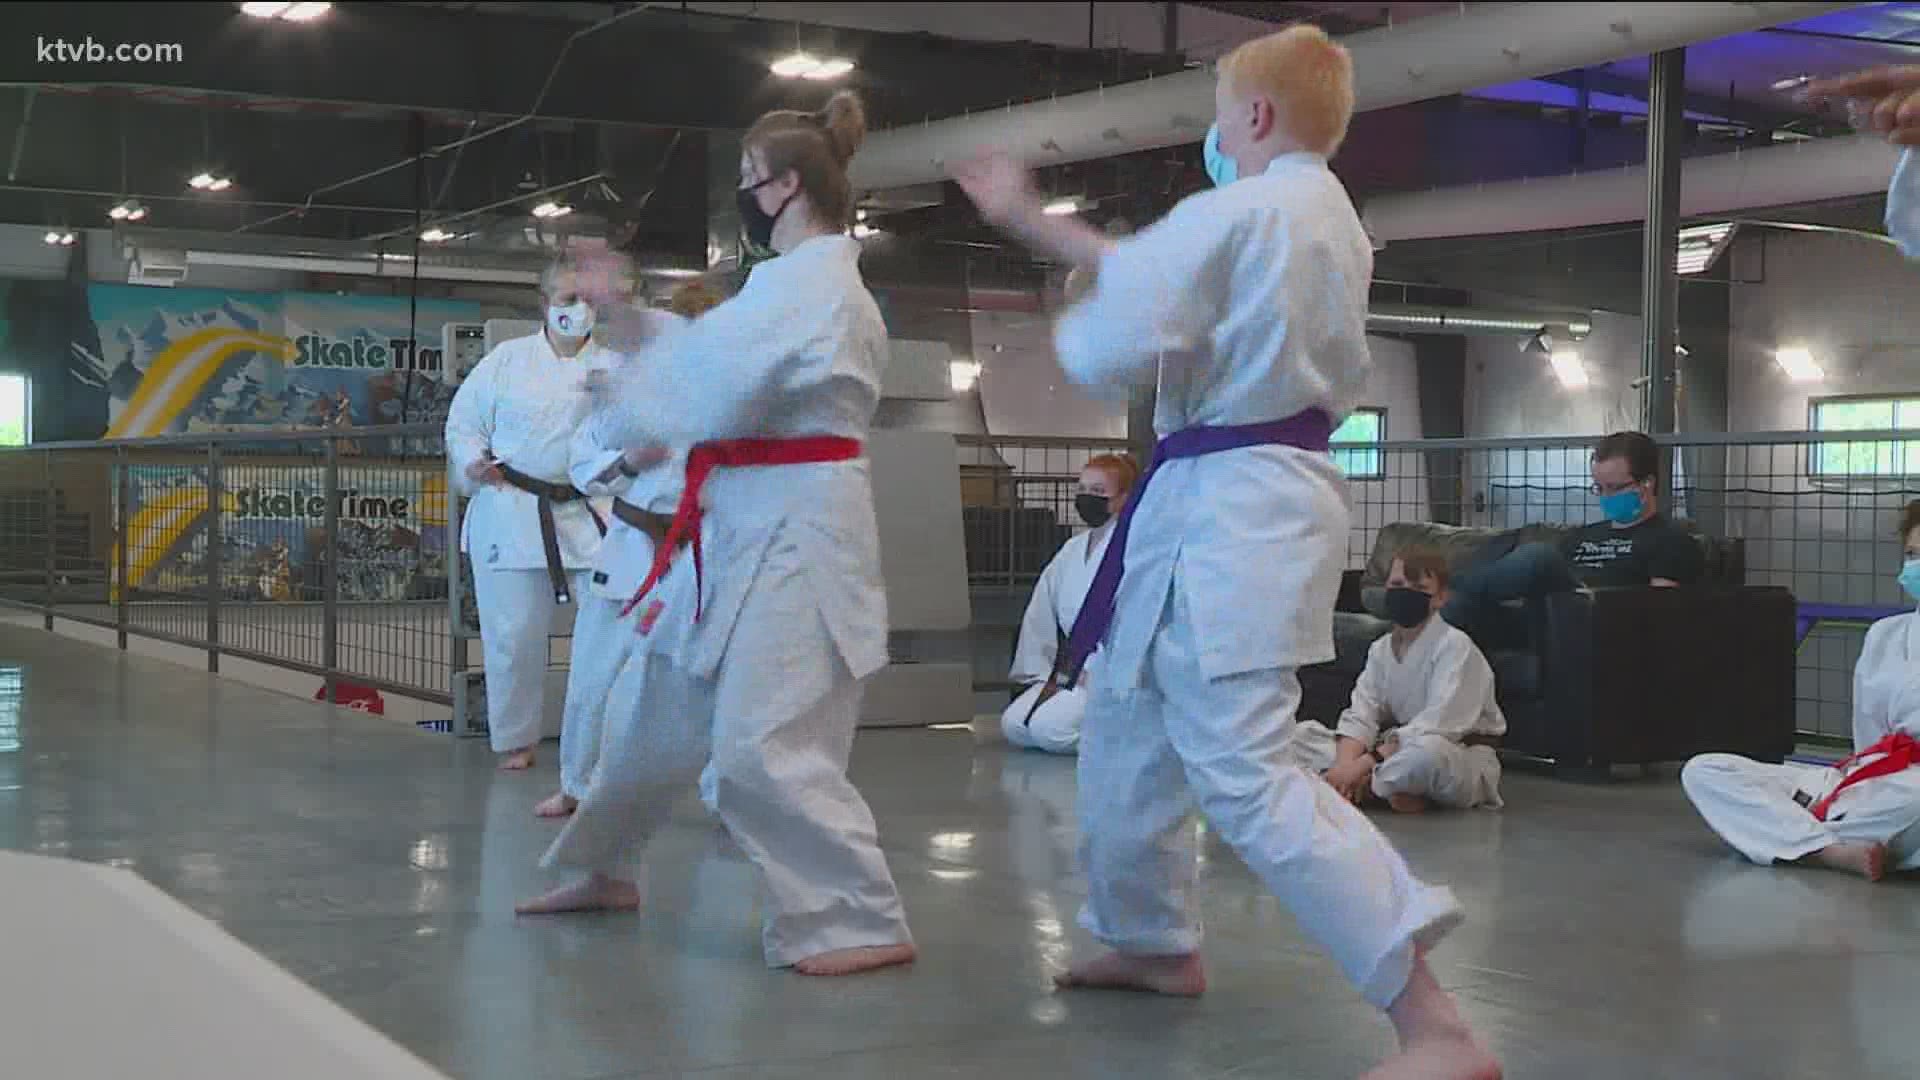 “I would define a dojo as a community, a place where you can come at the end of the day just to have friends,” one 10-year-old dojo member said.